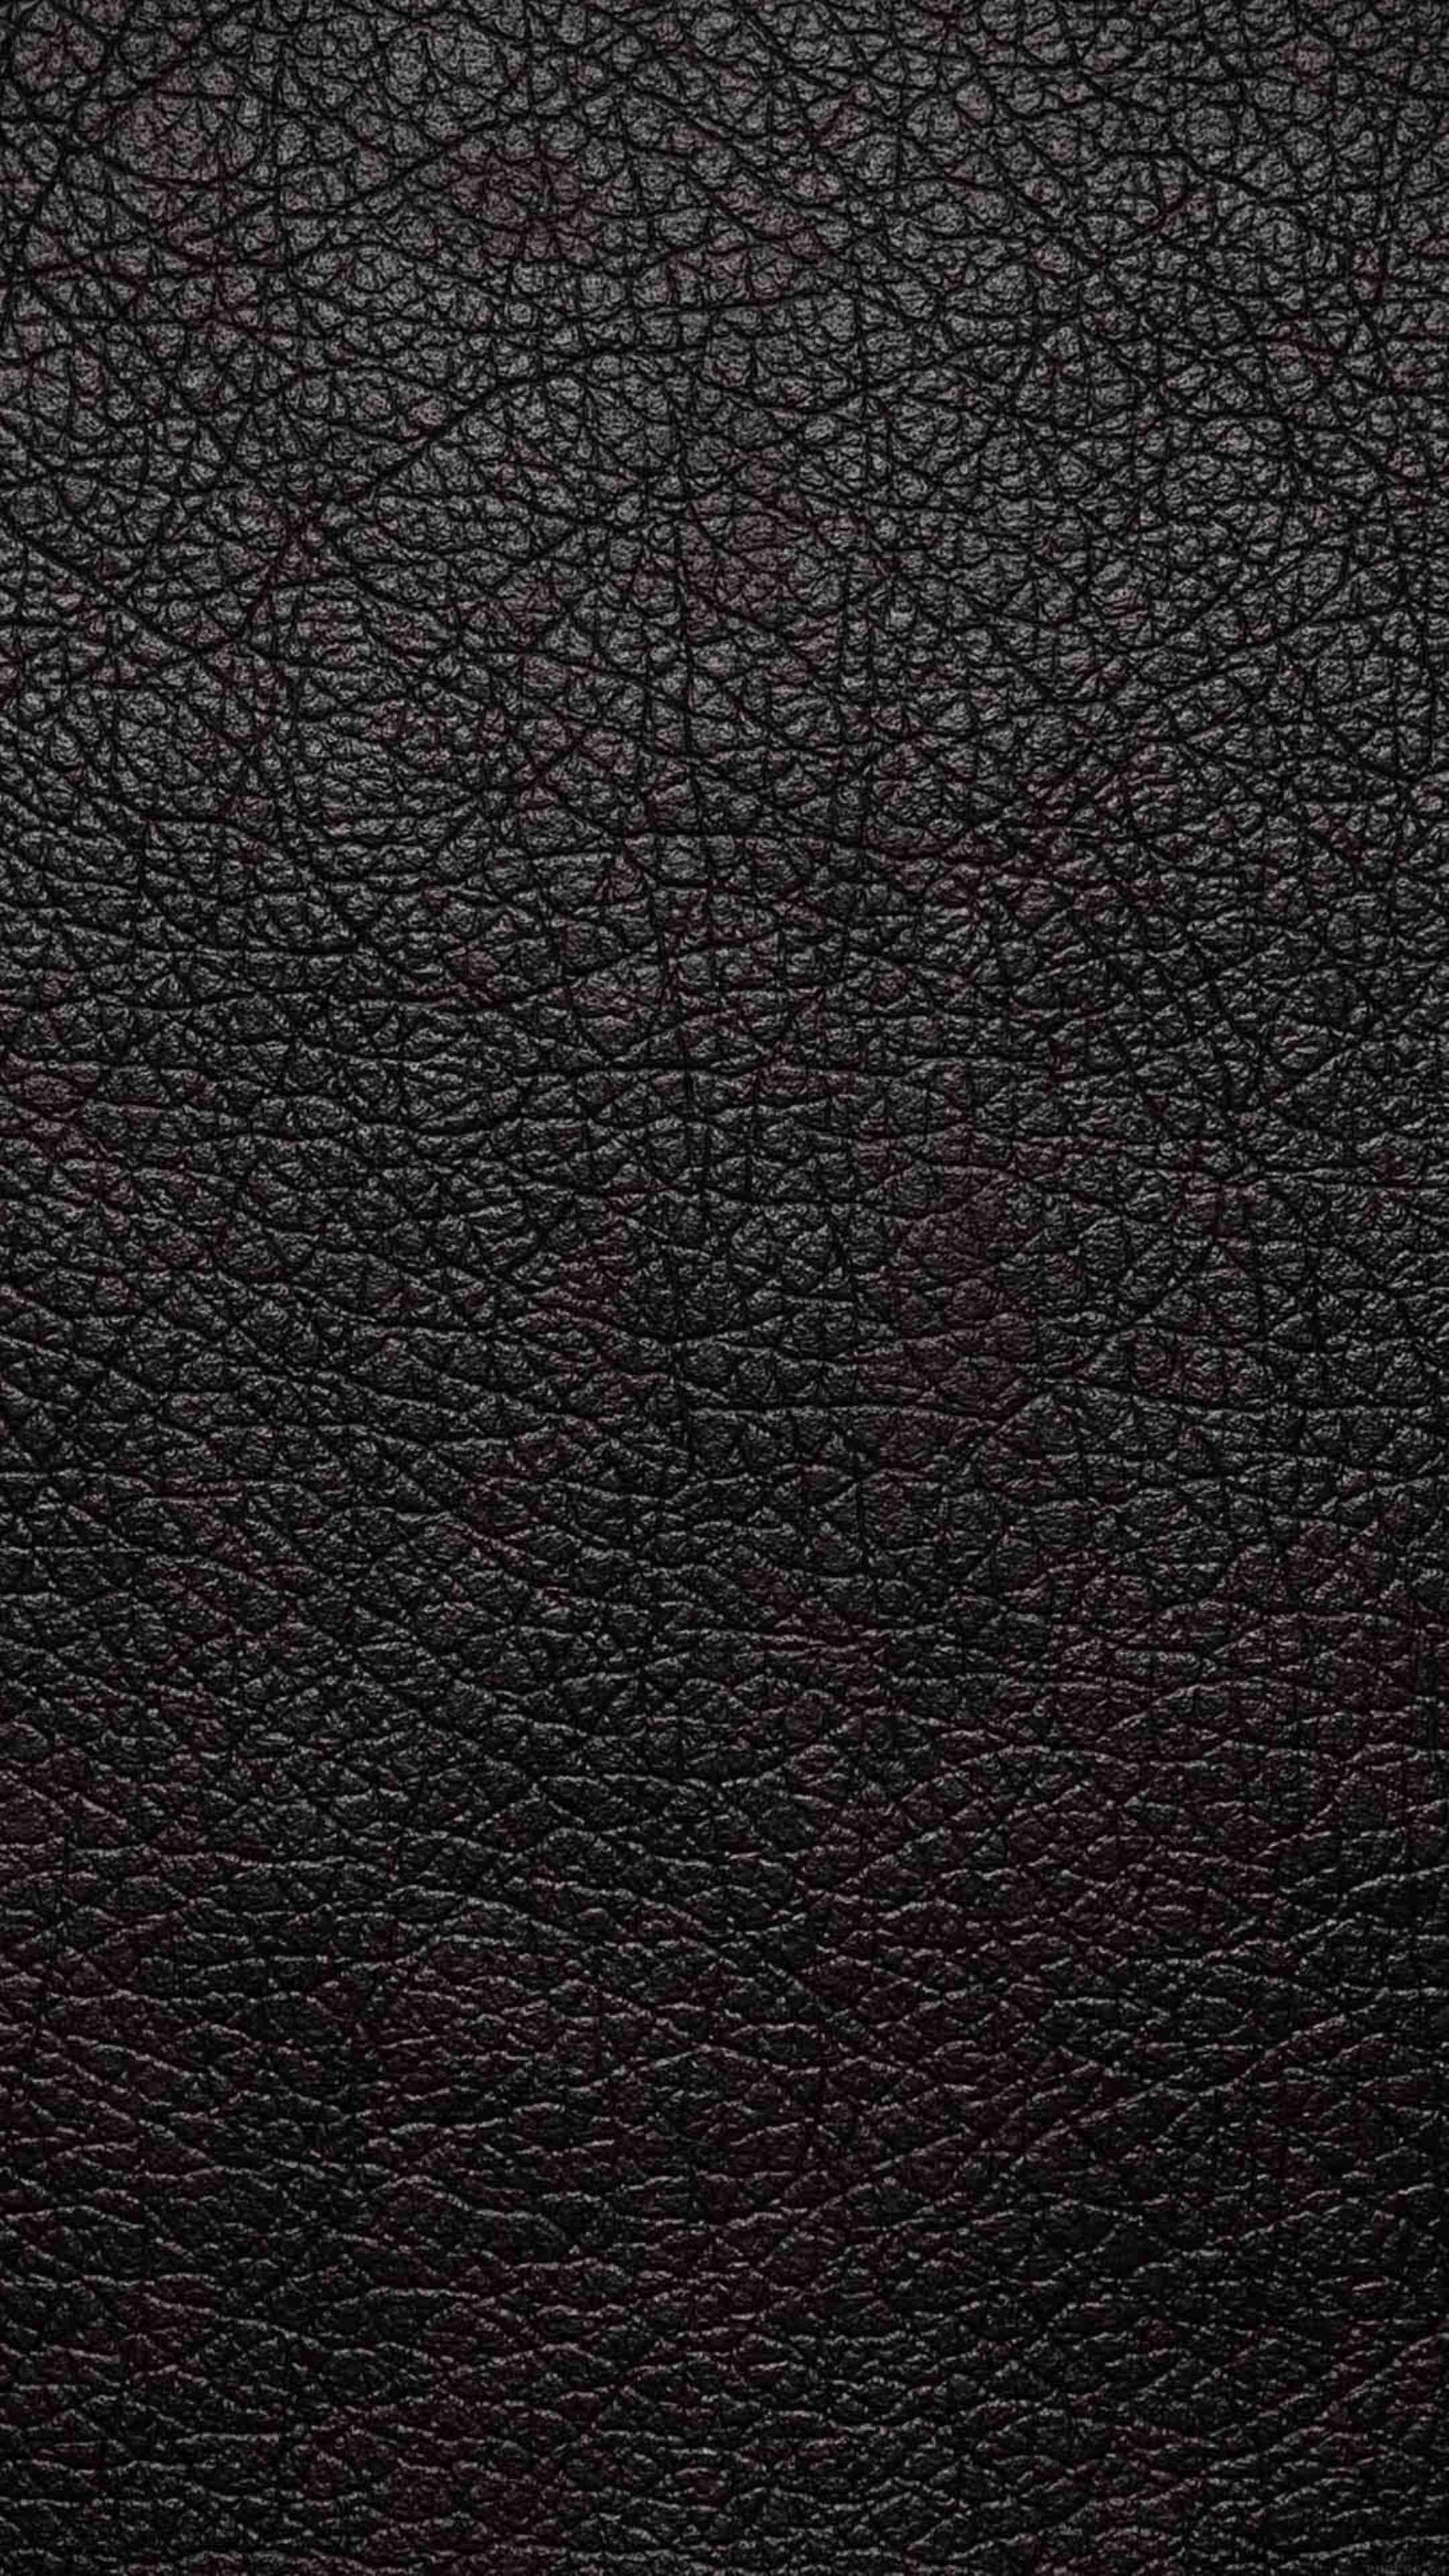 Leather Wall 4K Phone Wallpaper